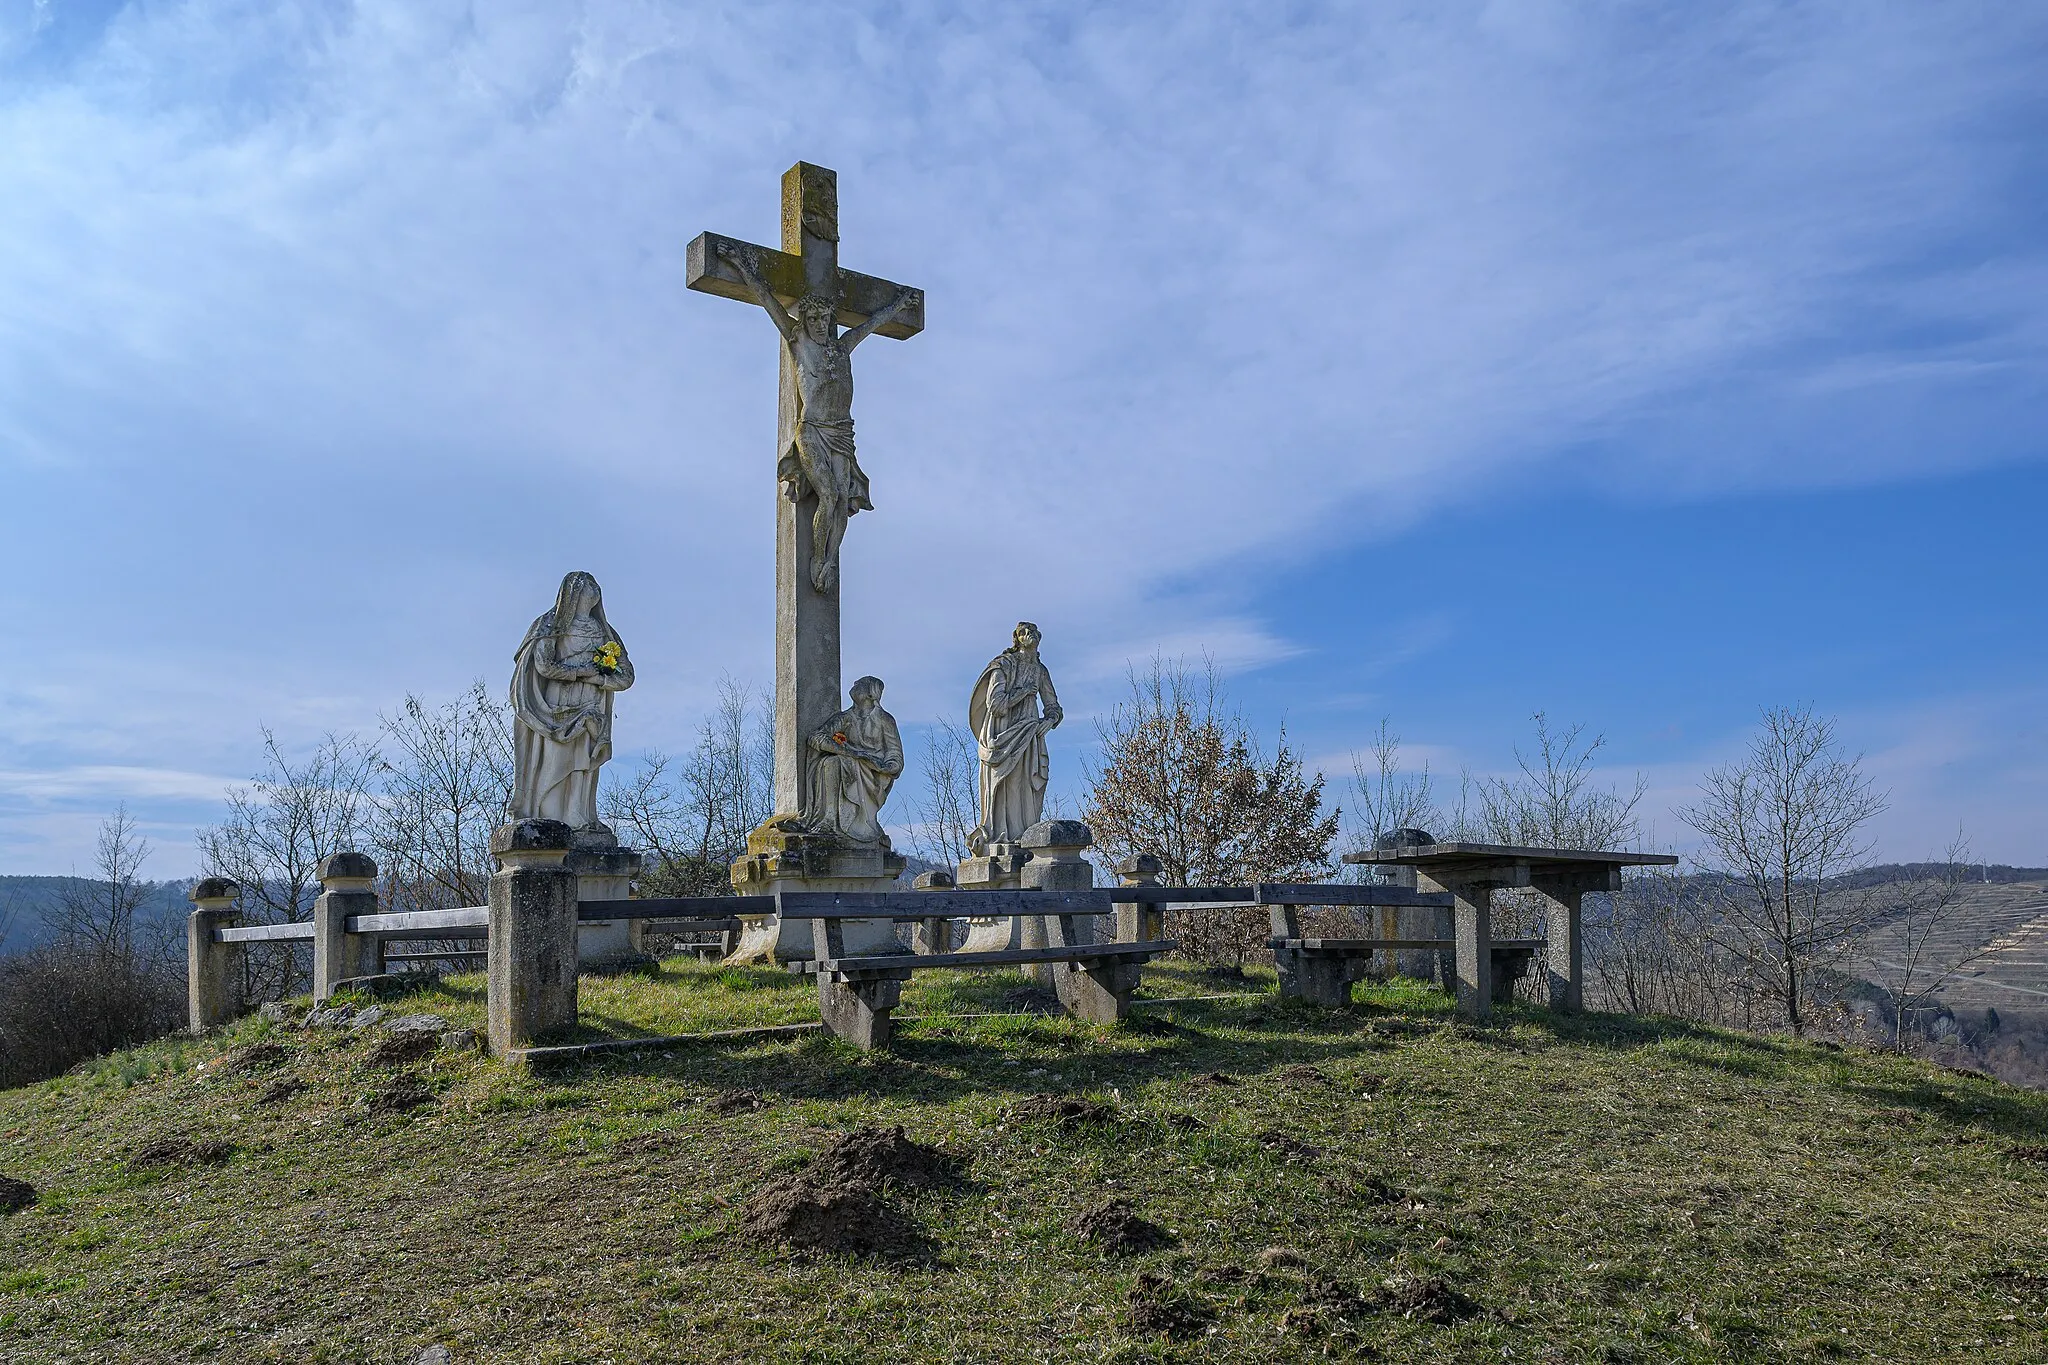 Photo showing: Crucifixion group at Calvary by Stiefern and Schönberg. There are a total of 14 stations on Calvary from the last third of the 18th century, as well as a crucifixion group from 1782. The Stiefen and Schönberger Ways of the Cross share the last three stations.